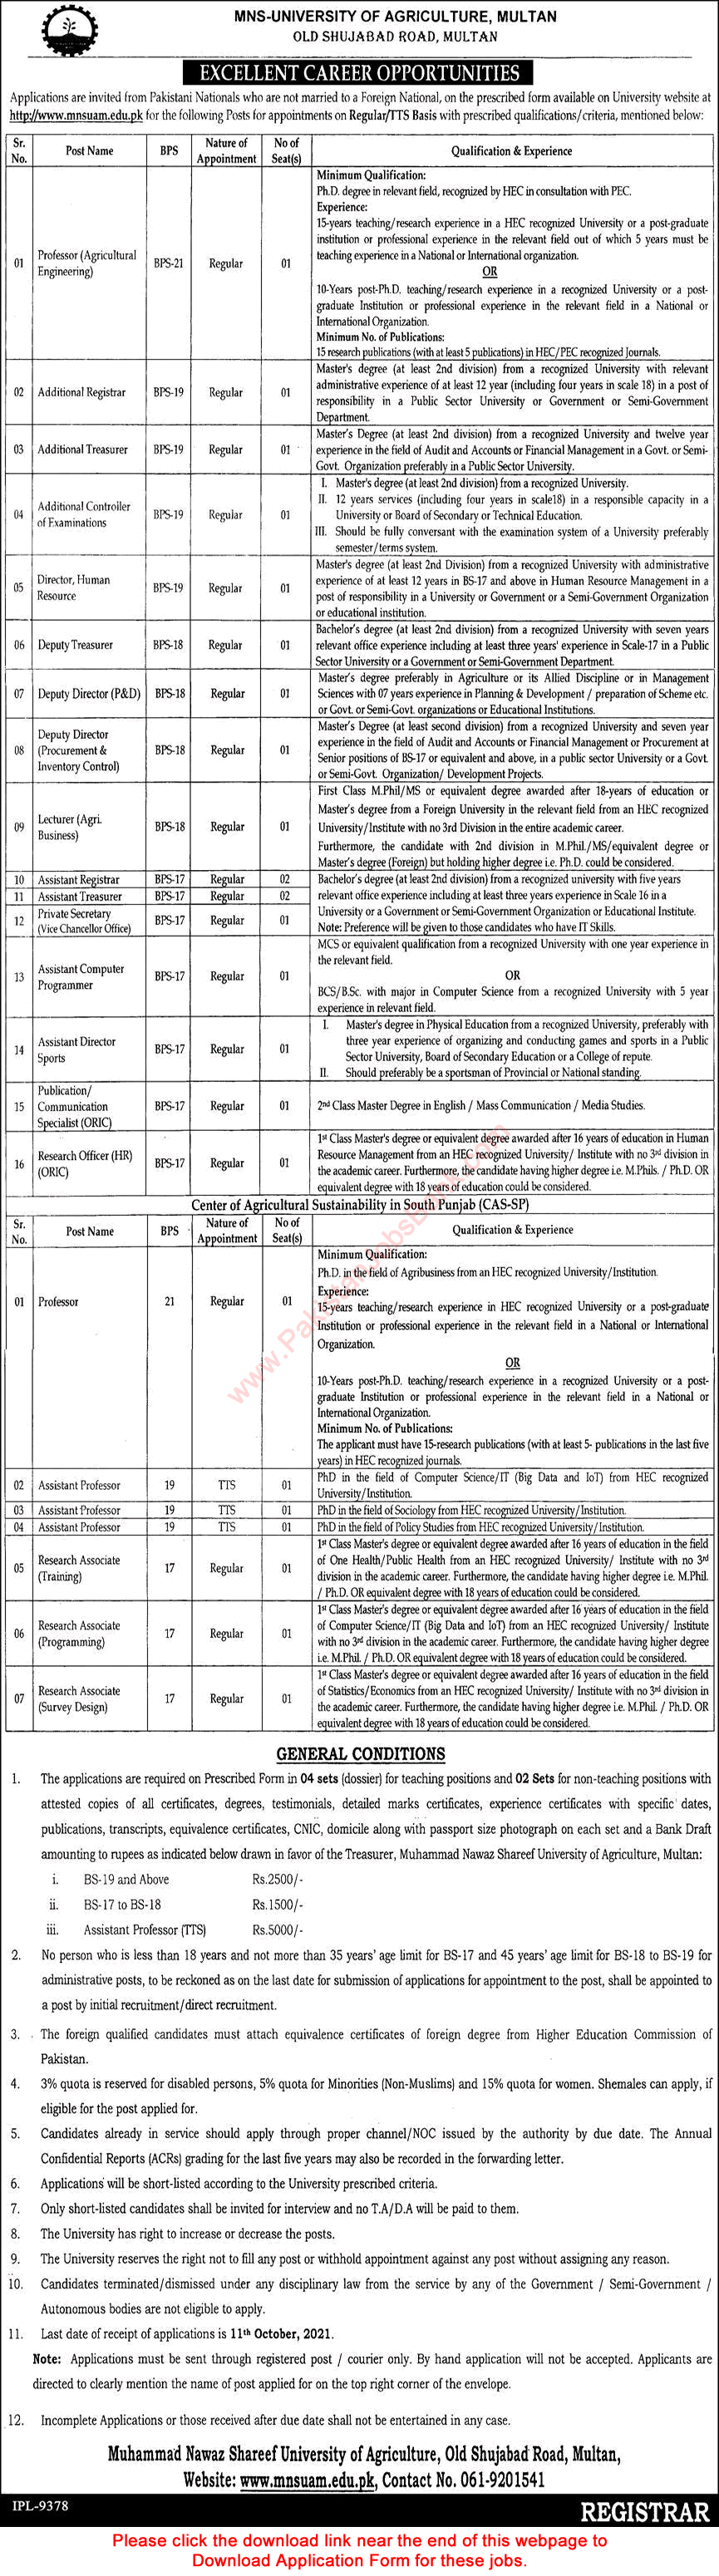 MNS University of Agriculture Multan Jobs September 2021 Application Form Teaching Faculty & Others Latest